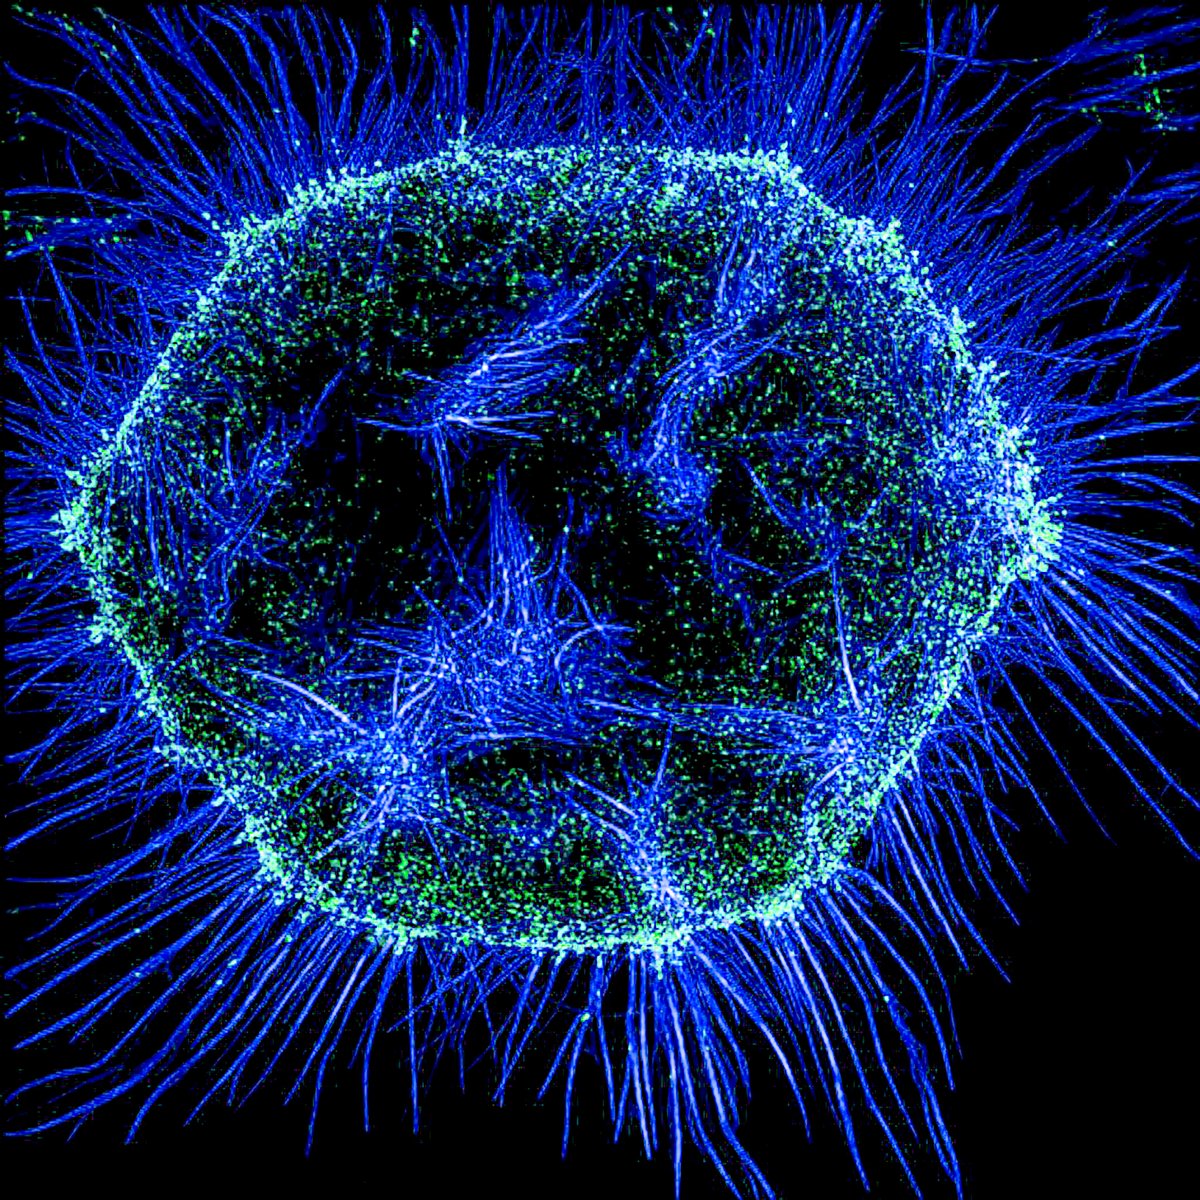 A cell in metaphase photographed through a microscope. Two components of the cytoskeleton, actin filaments and myosin II, are shown. #CellBiology